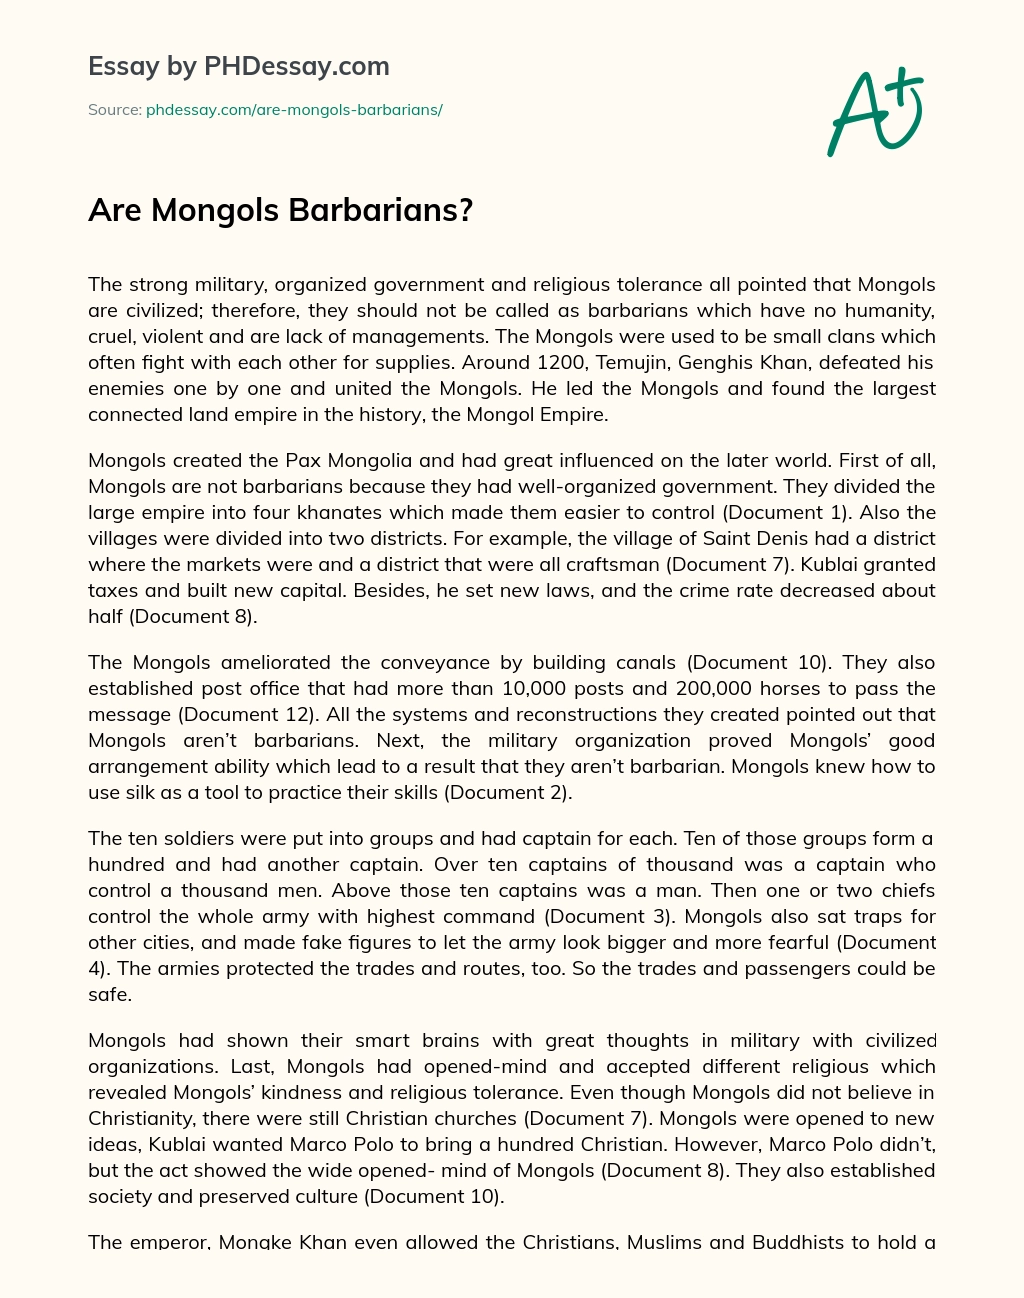 Are Mongols Barbarians? essay